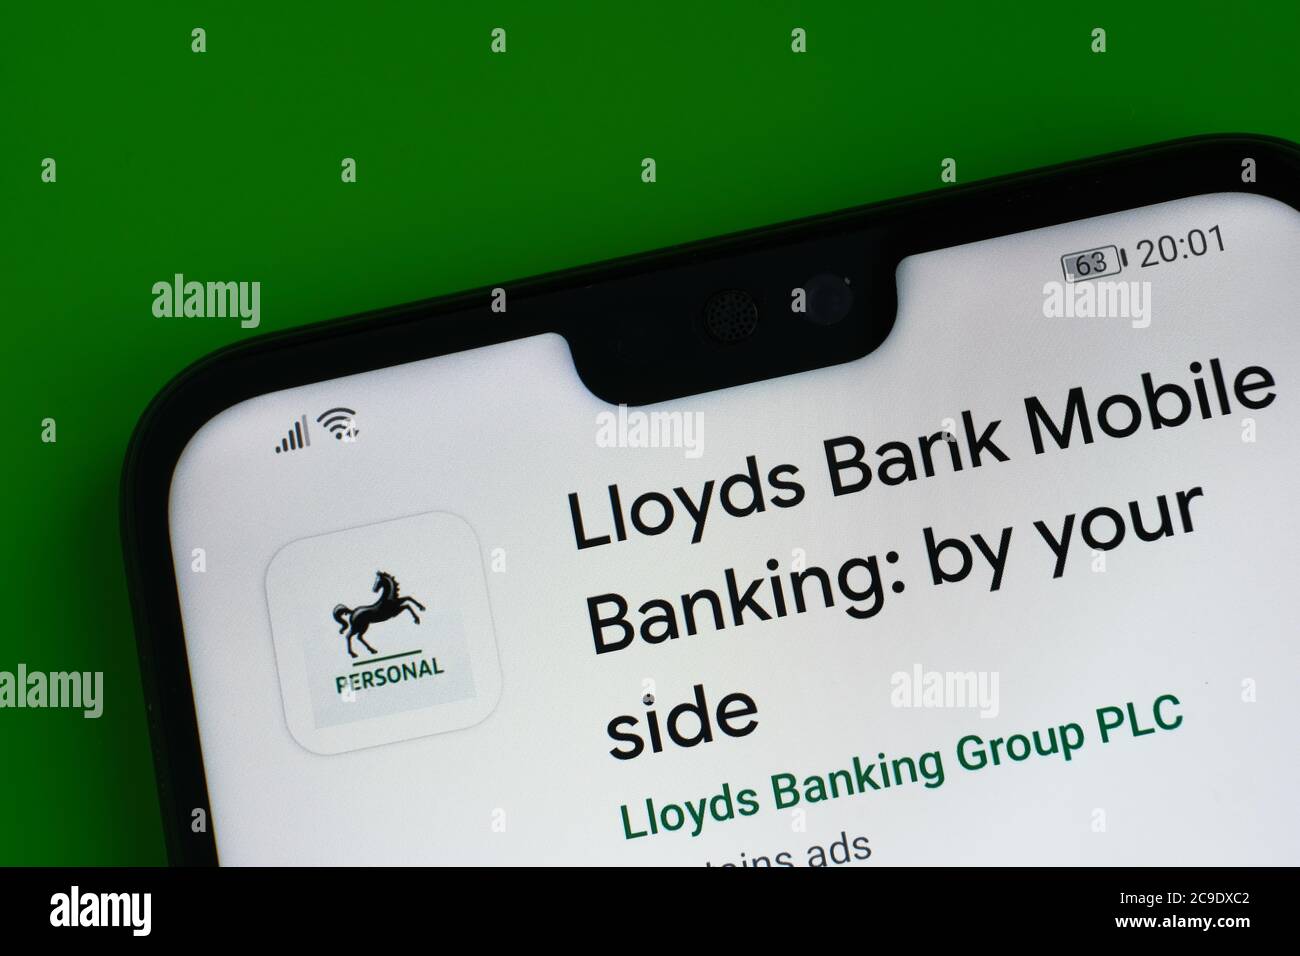 Stone / United Kingdom - July 30 2020: Lloyds Bank Mobile Banking app seen on the corner of mobile phone. Stock Photo